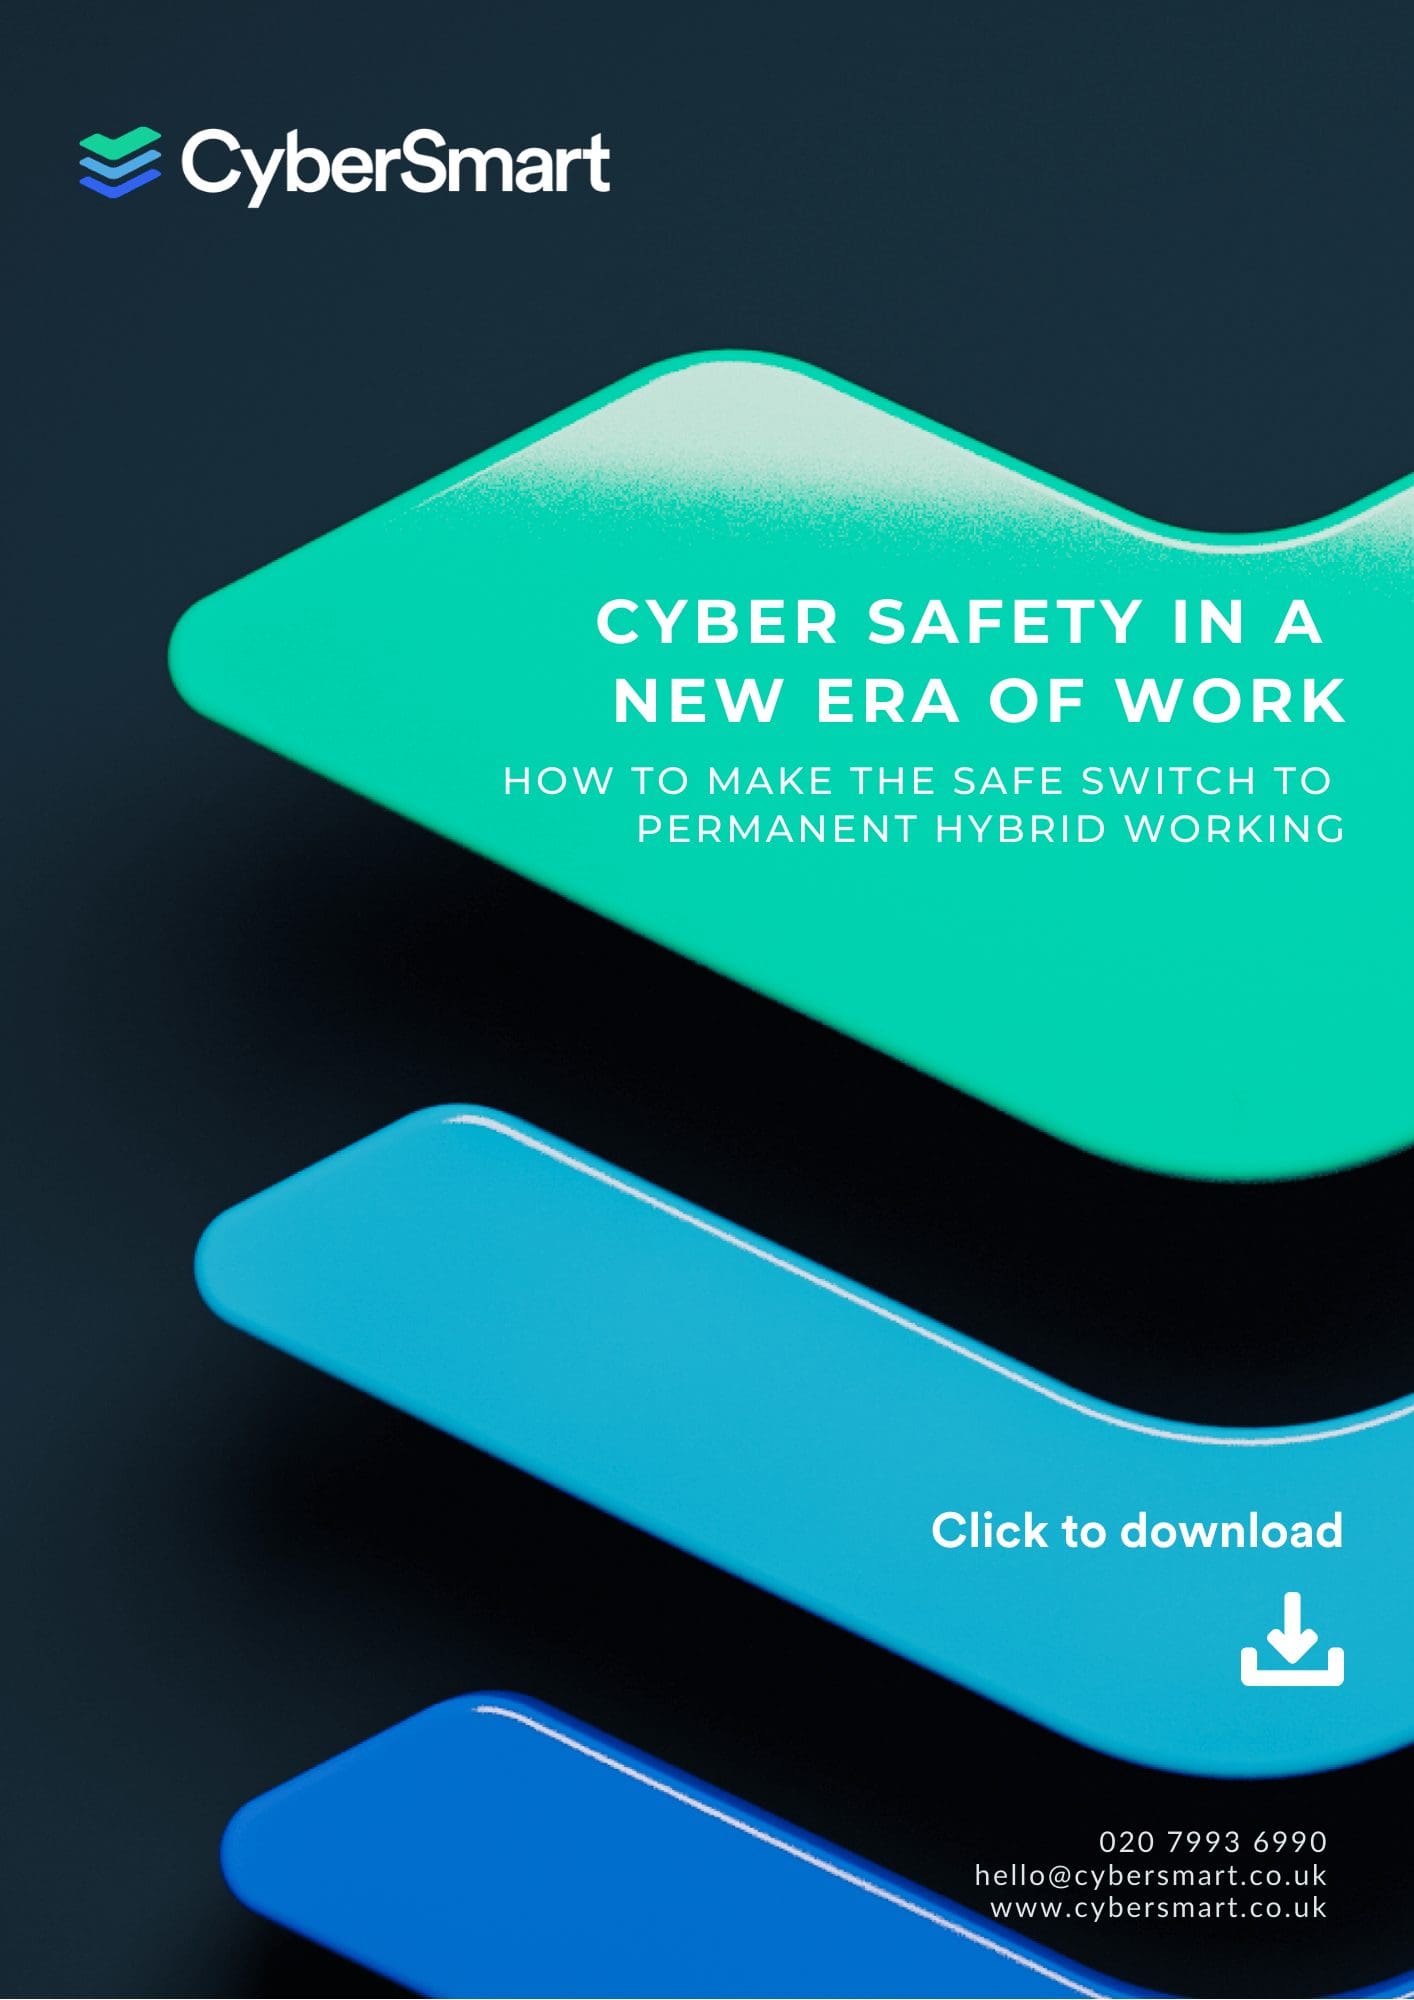 Remote Working Cyber Safety Guide